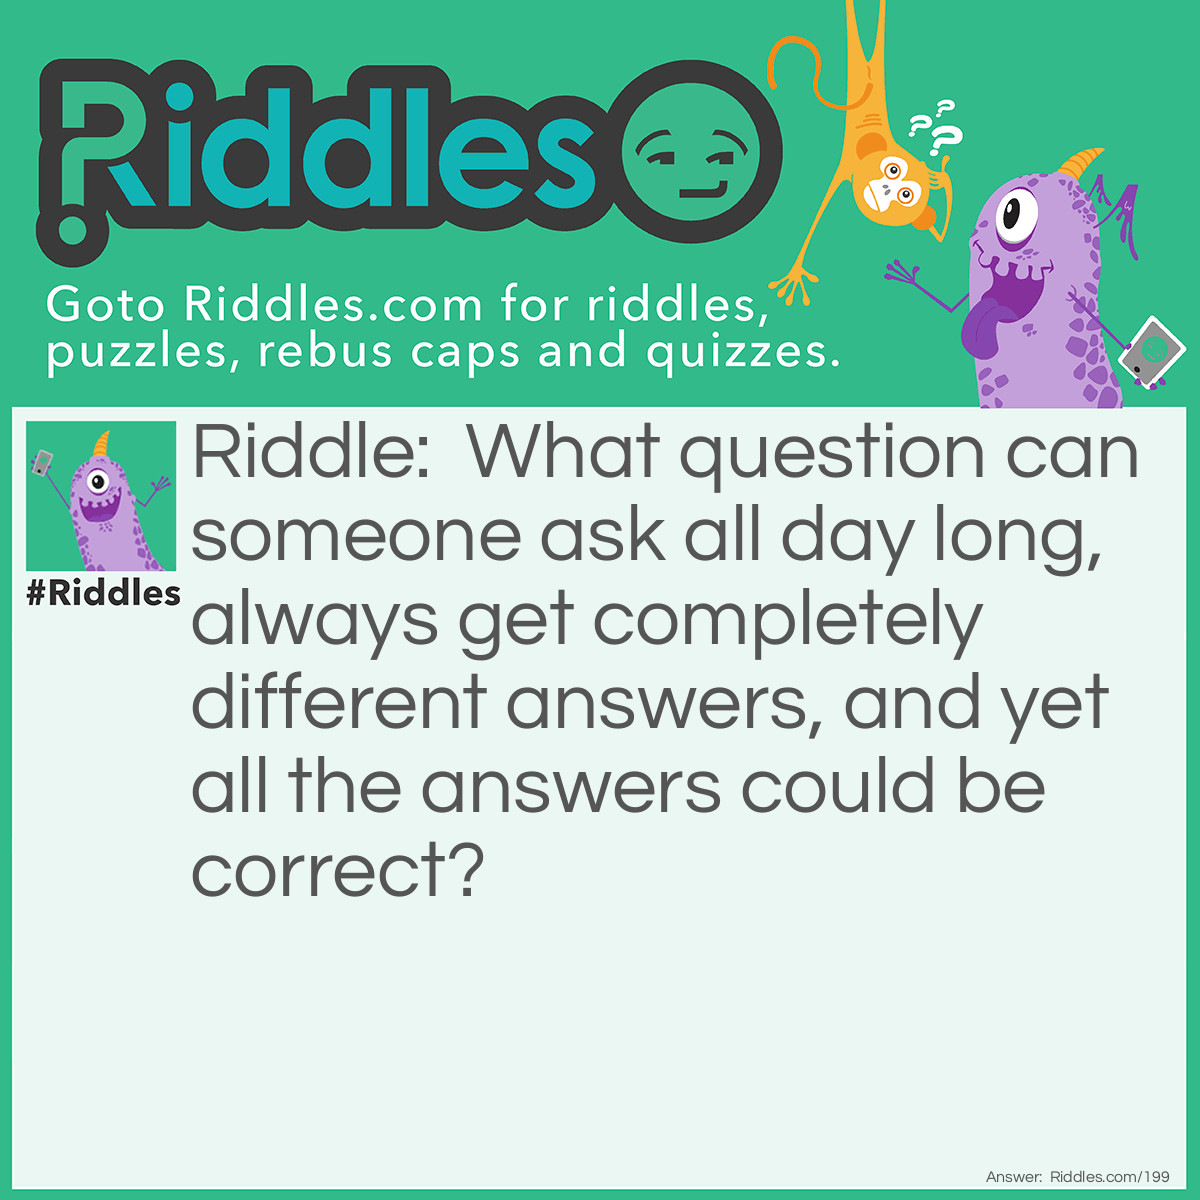 Riddle: What question can someone ask all day long, always get completely different answers, and yet all the answers could be correct? Answer: "What time is it?"